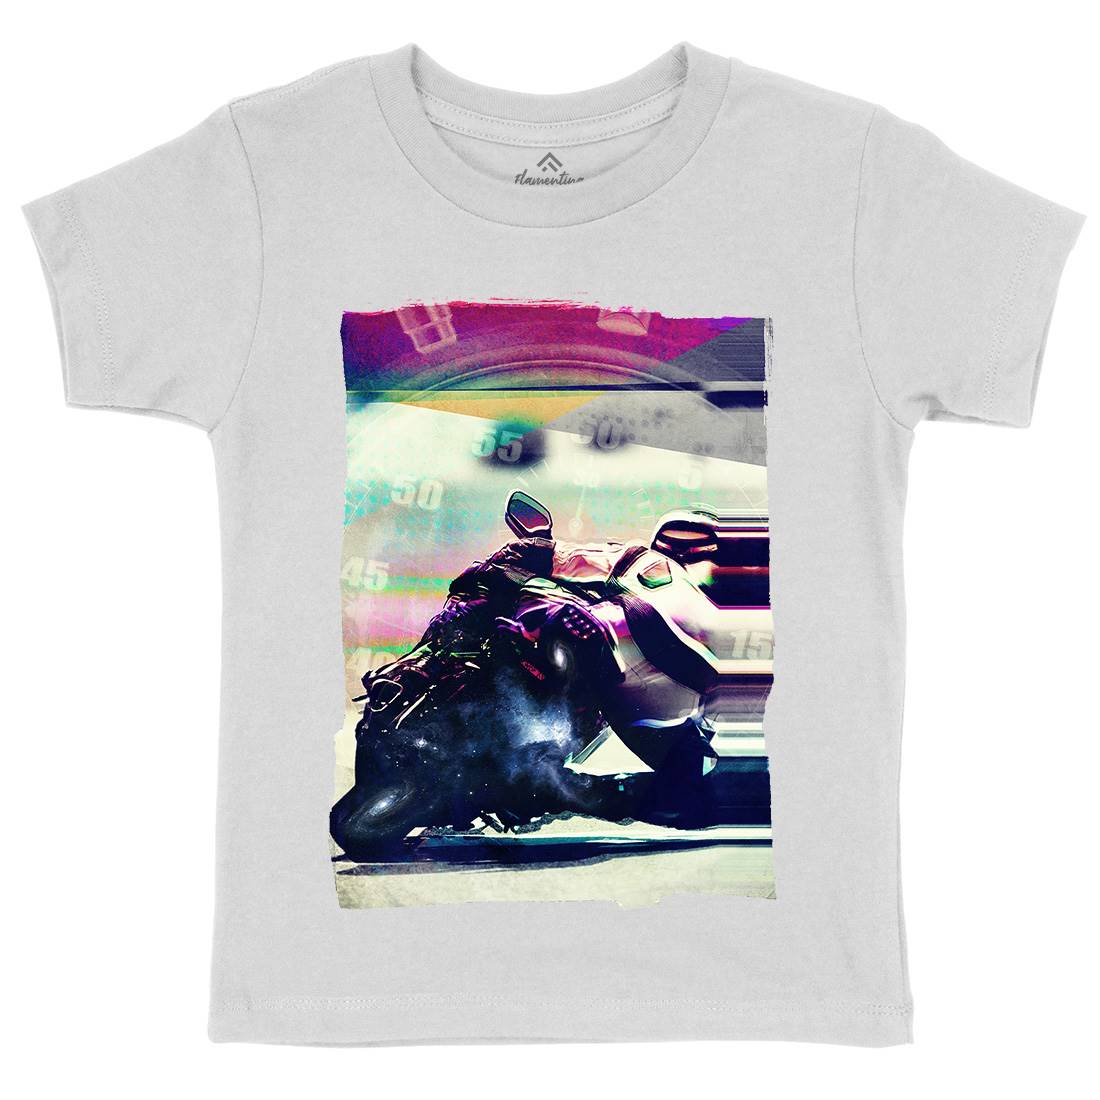 On Time Kids Crew Neck T-Shirt Motorcycles A891